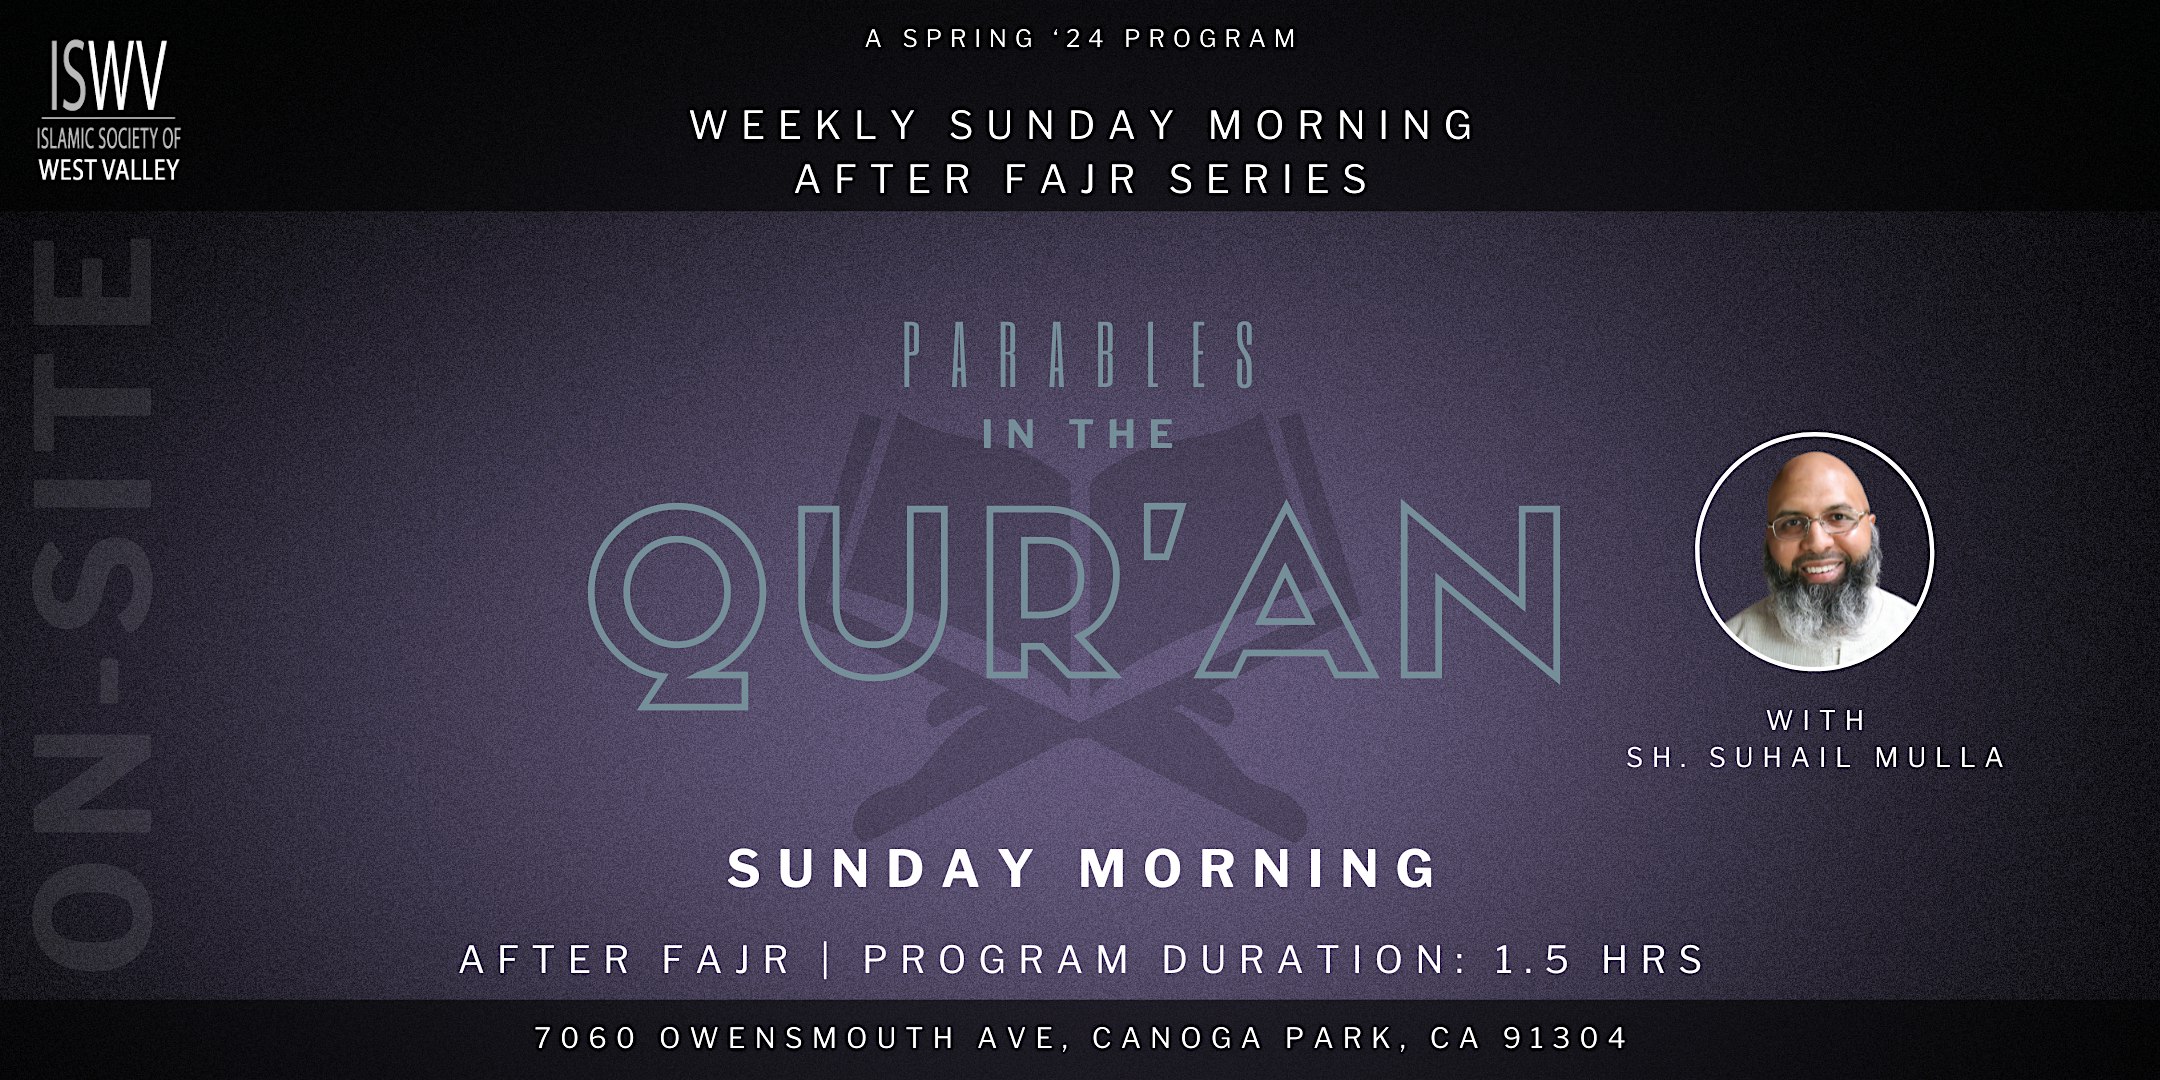 Parables in the Qur'an